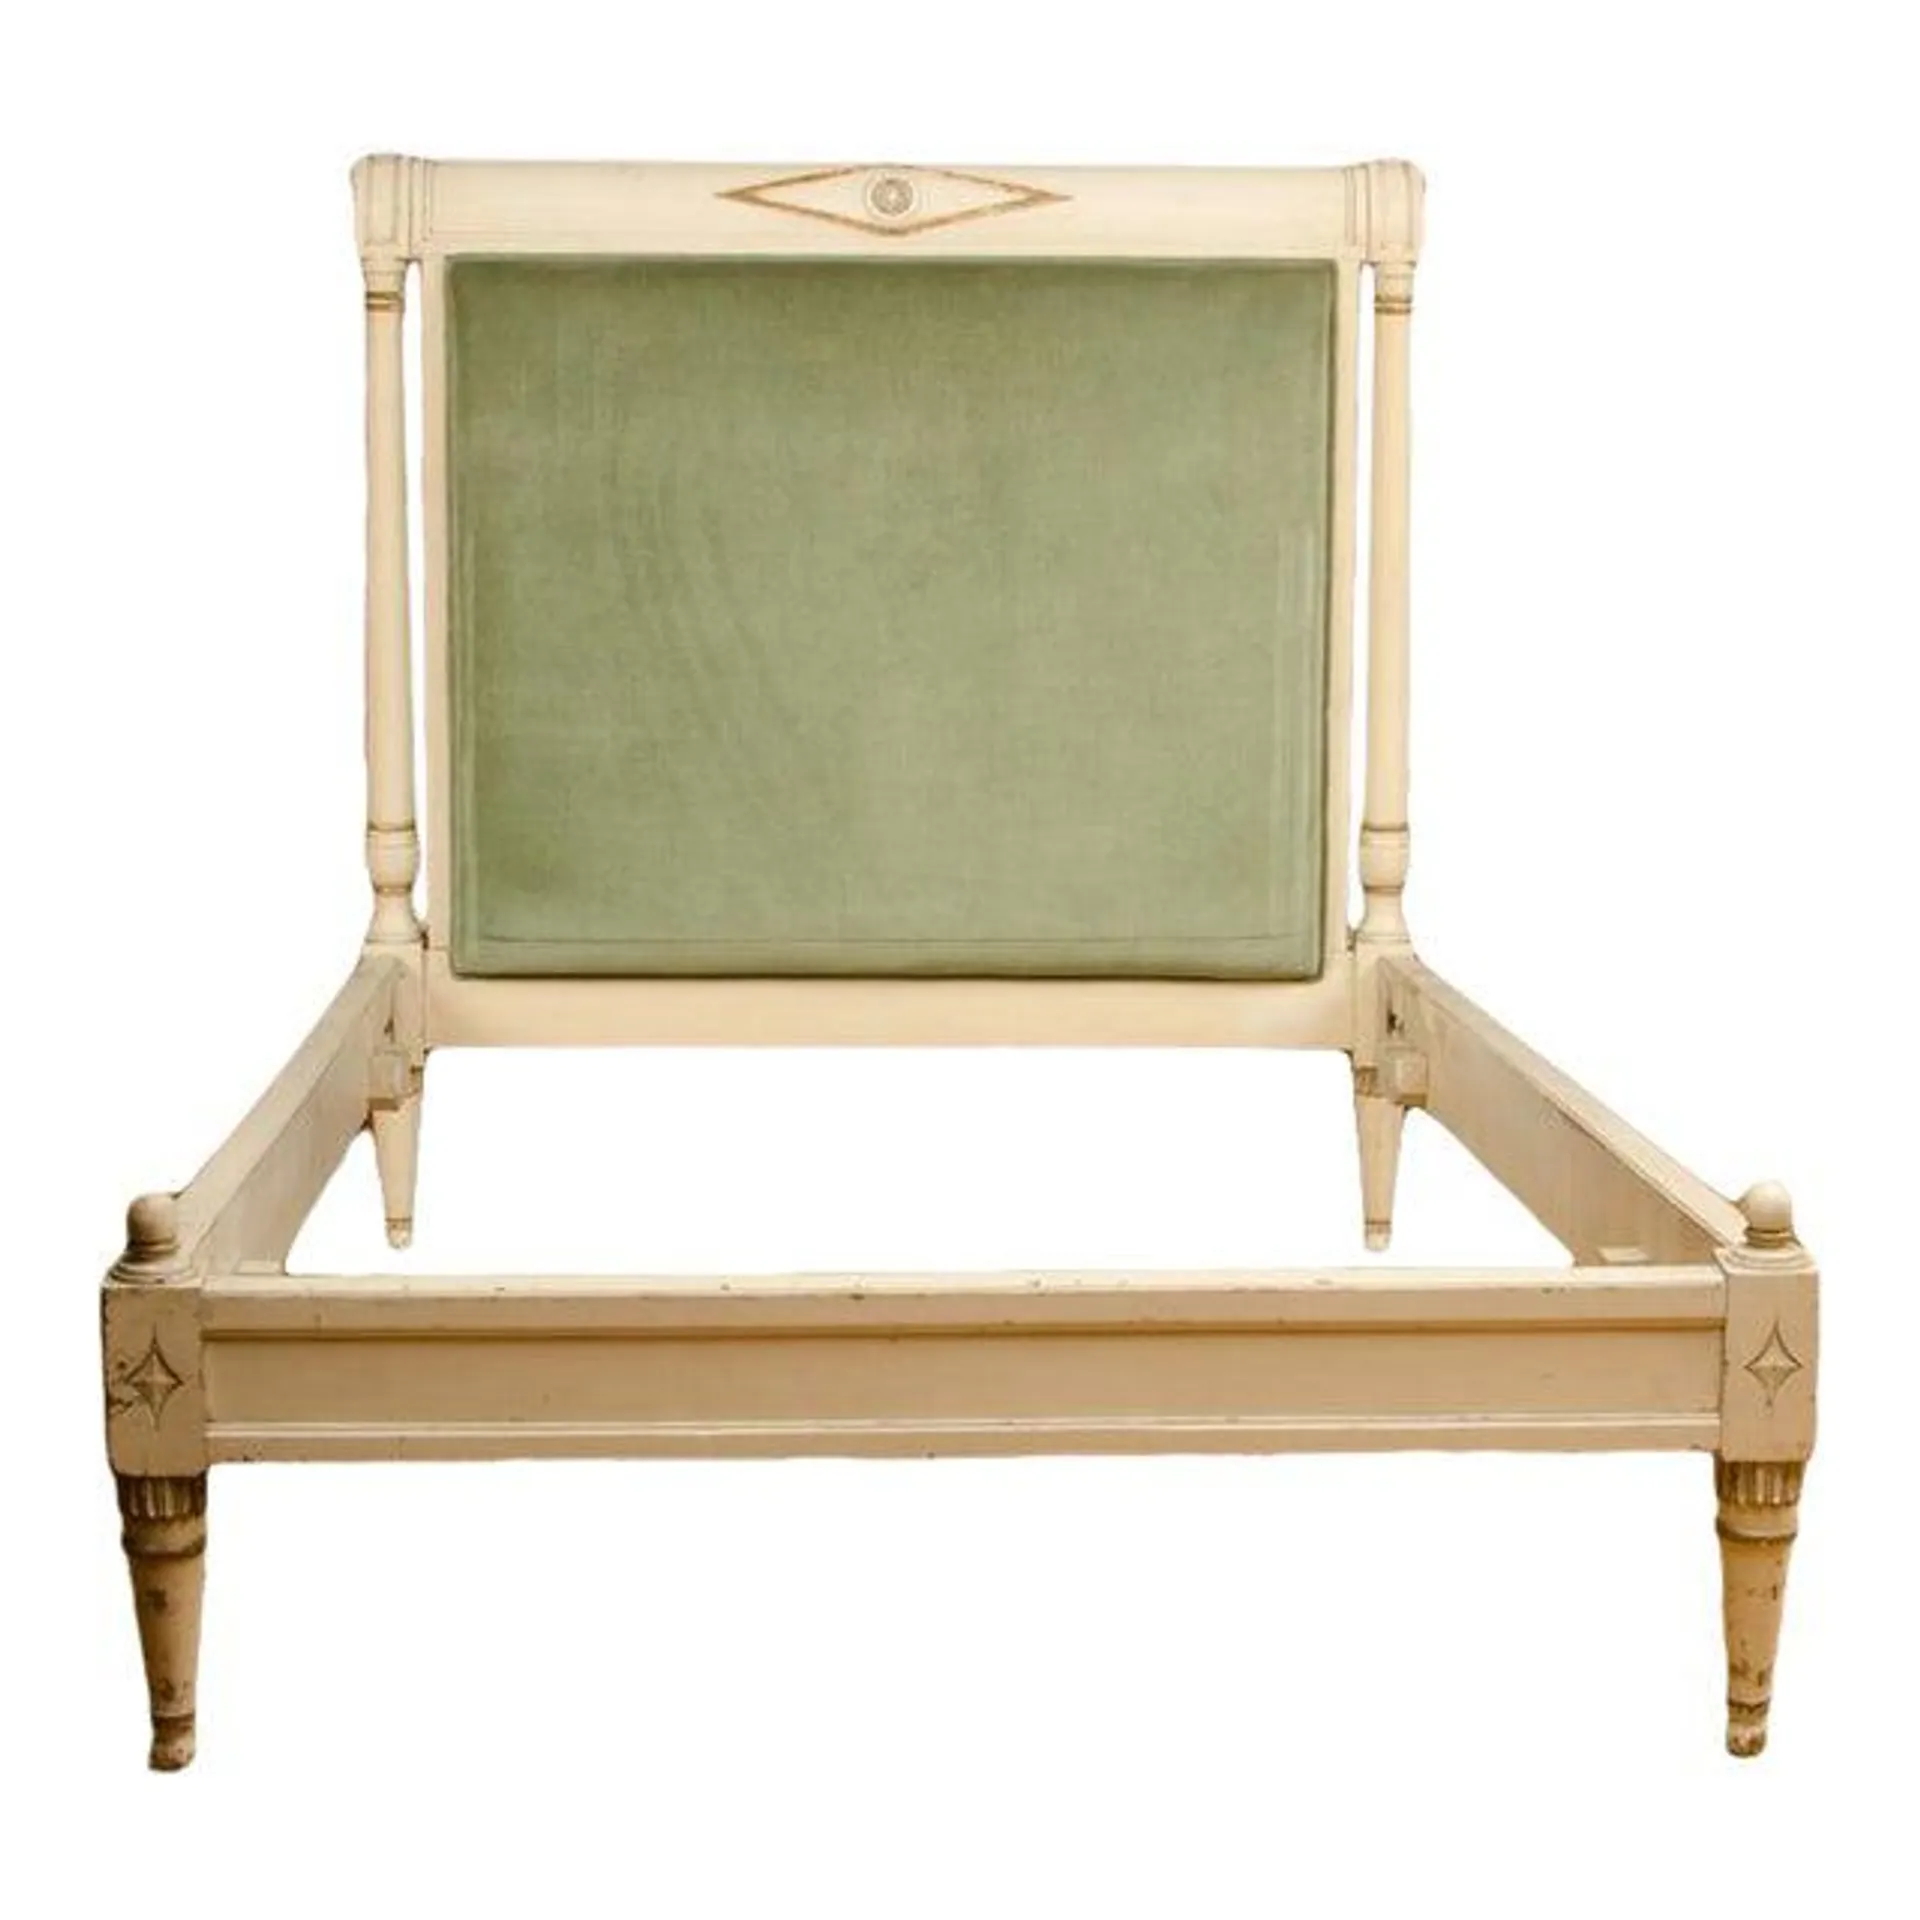 1950s French Louis XVI Style Painted Bedframe